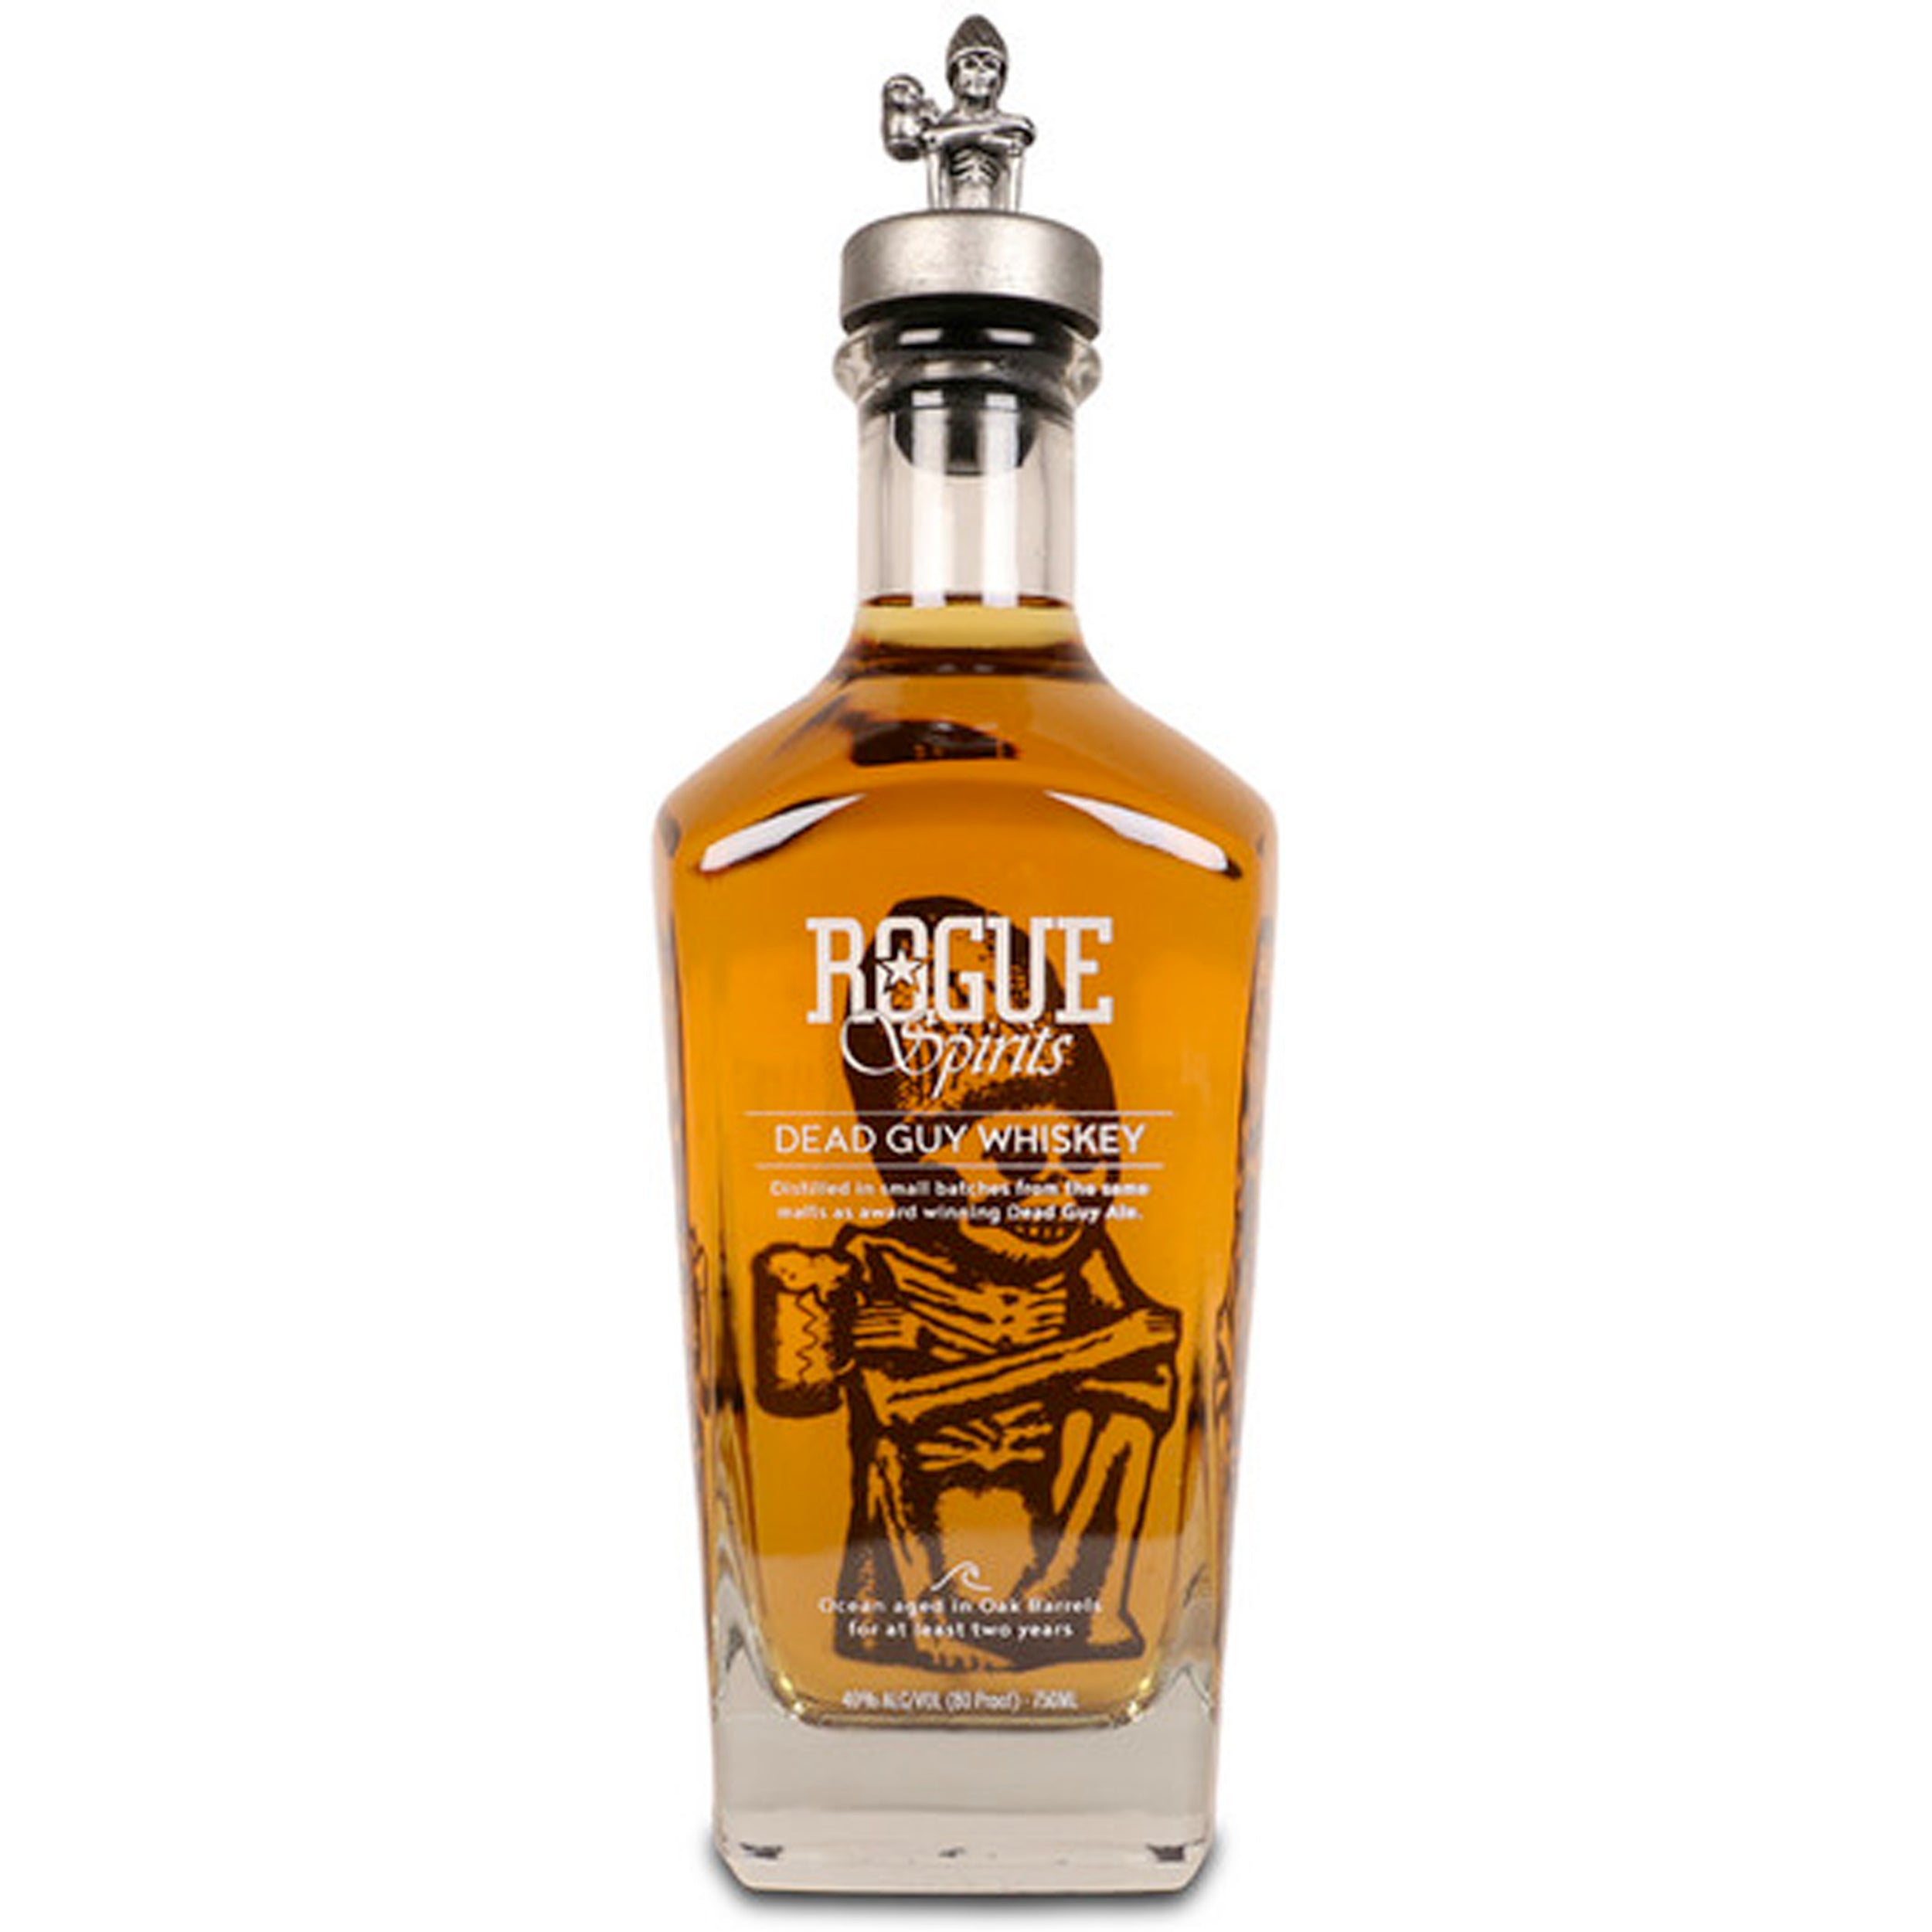 Rogue Dead Guy Straight Whiskey